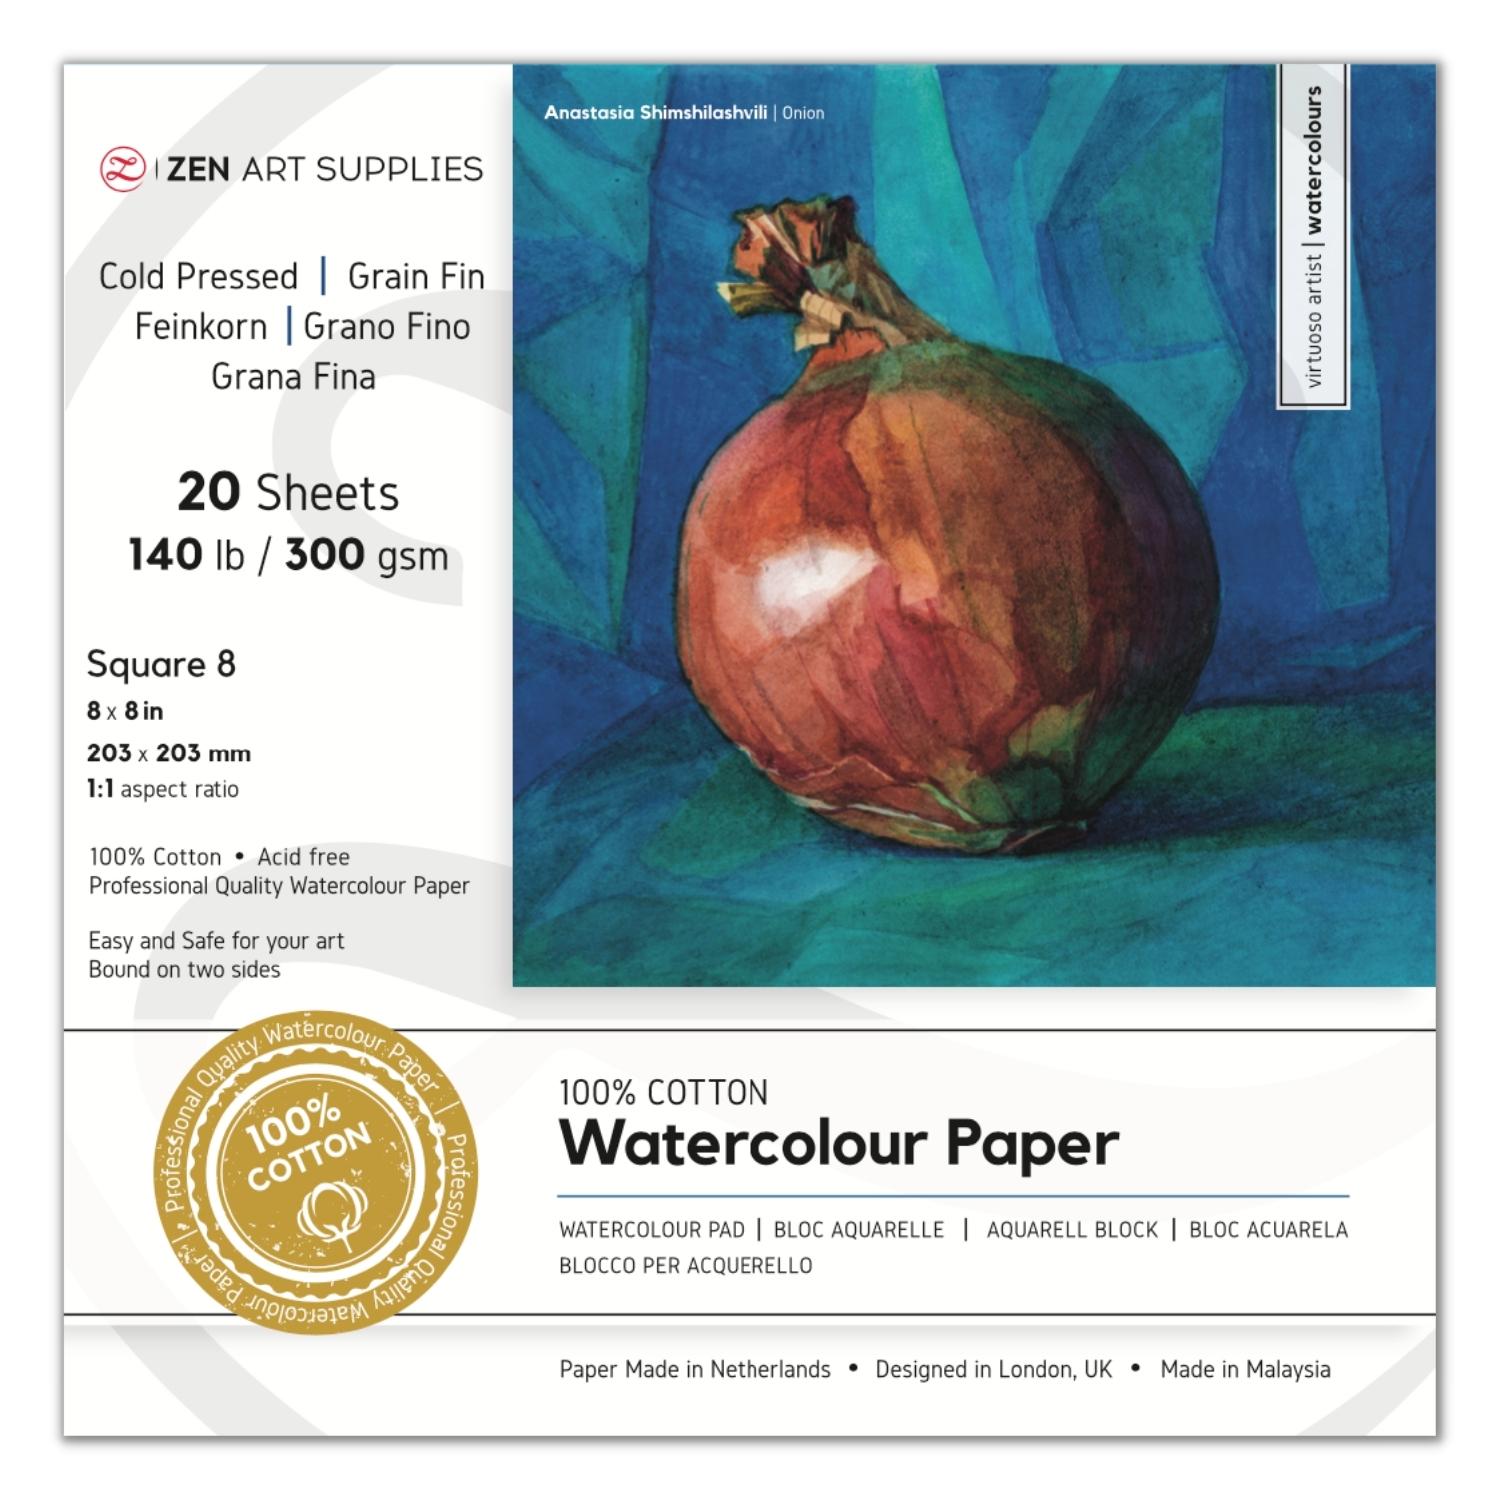 ARCHES Watercolor Paper - Cold Pressed - Bright White - 140 lb (300 gsm)  22x30 inch Pack of 10